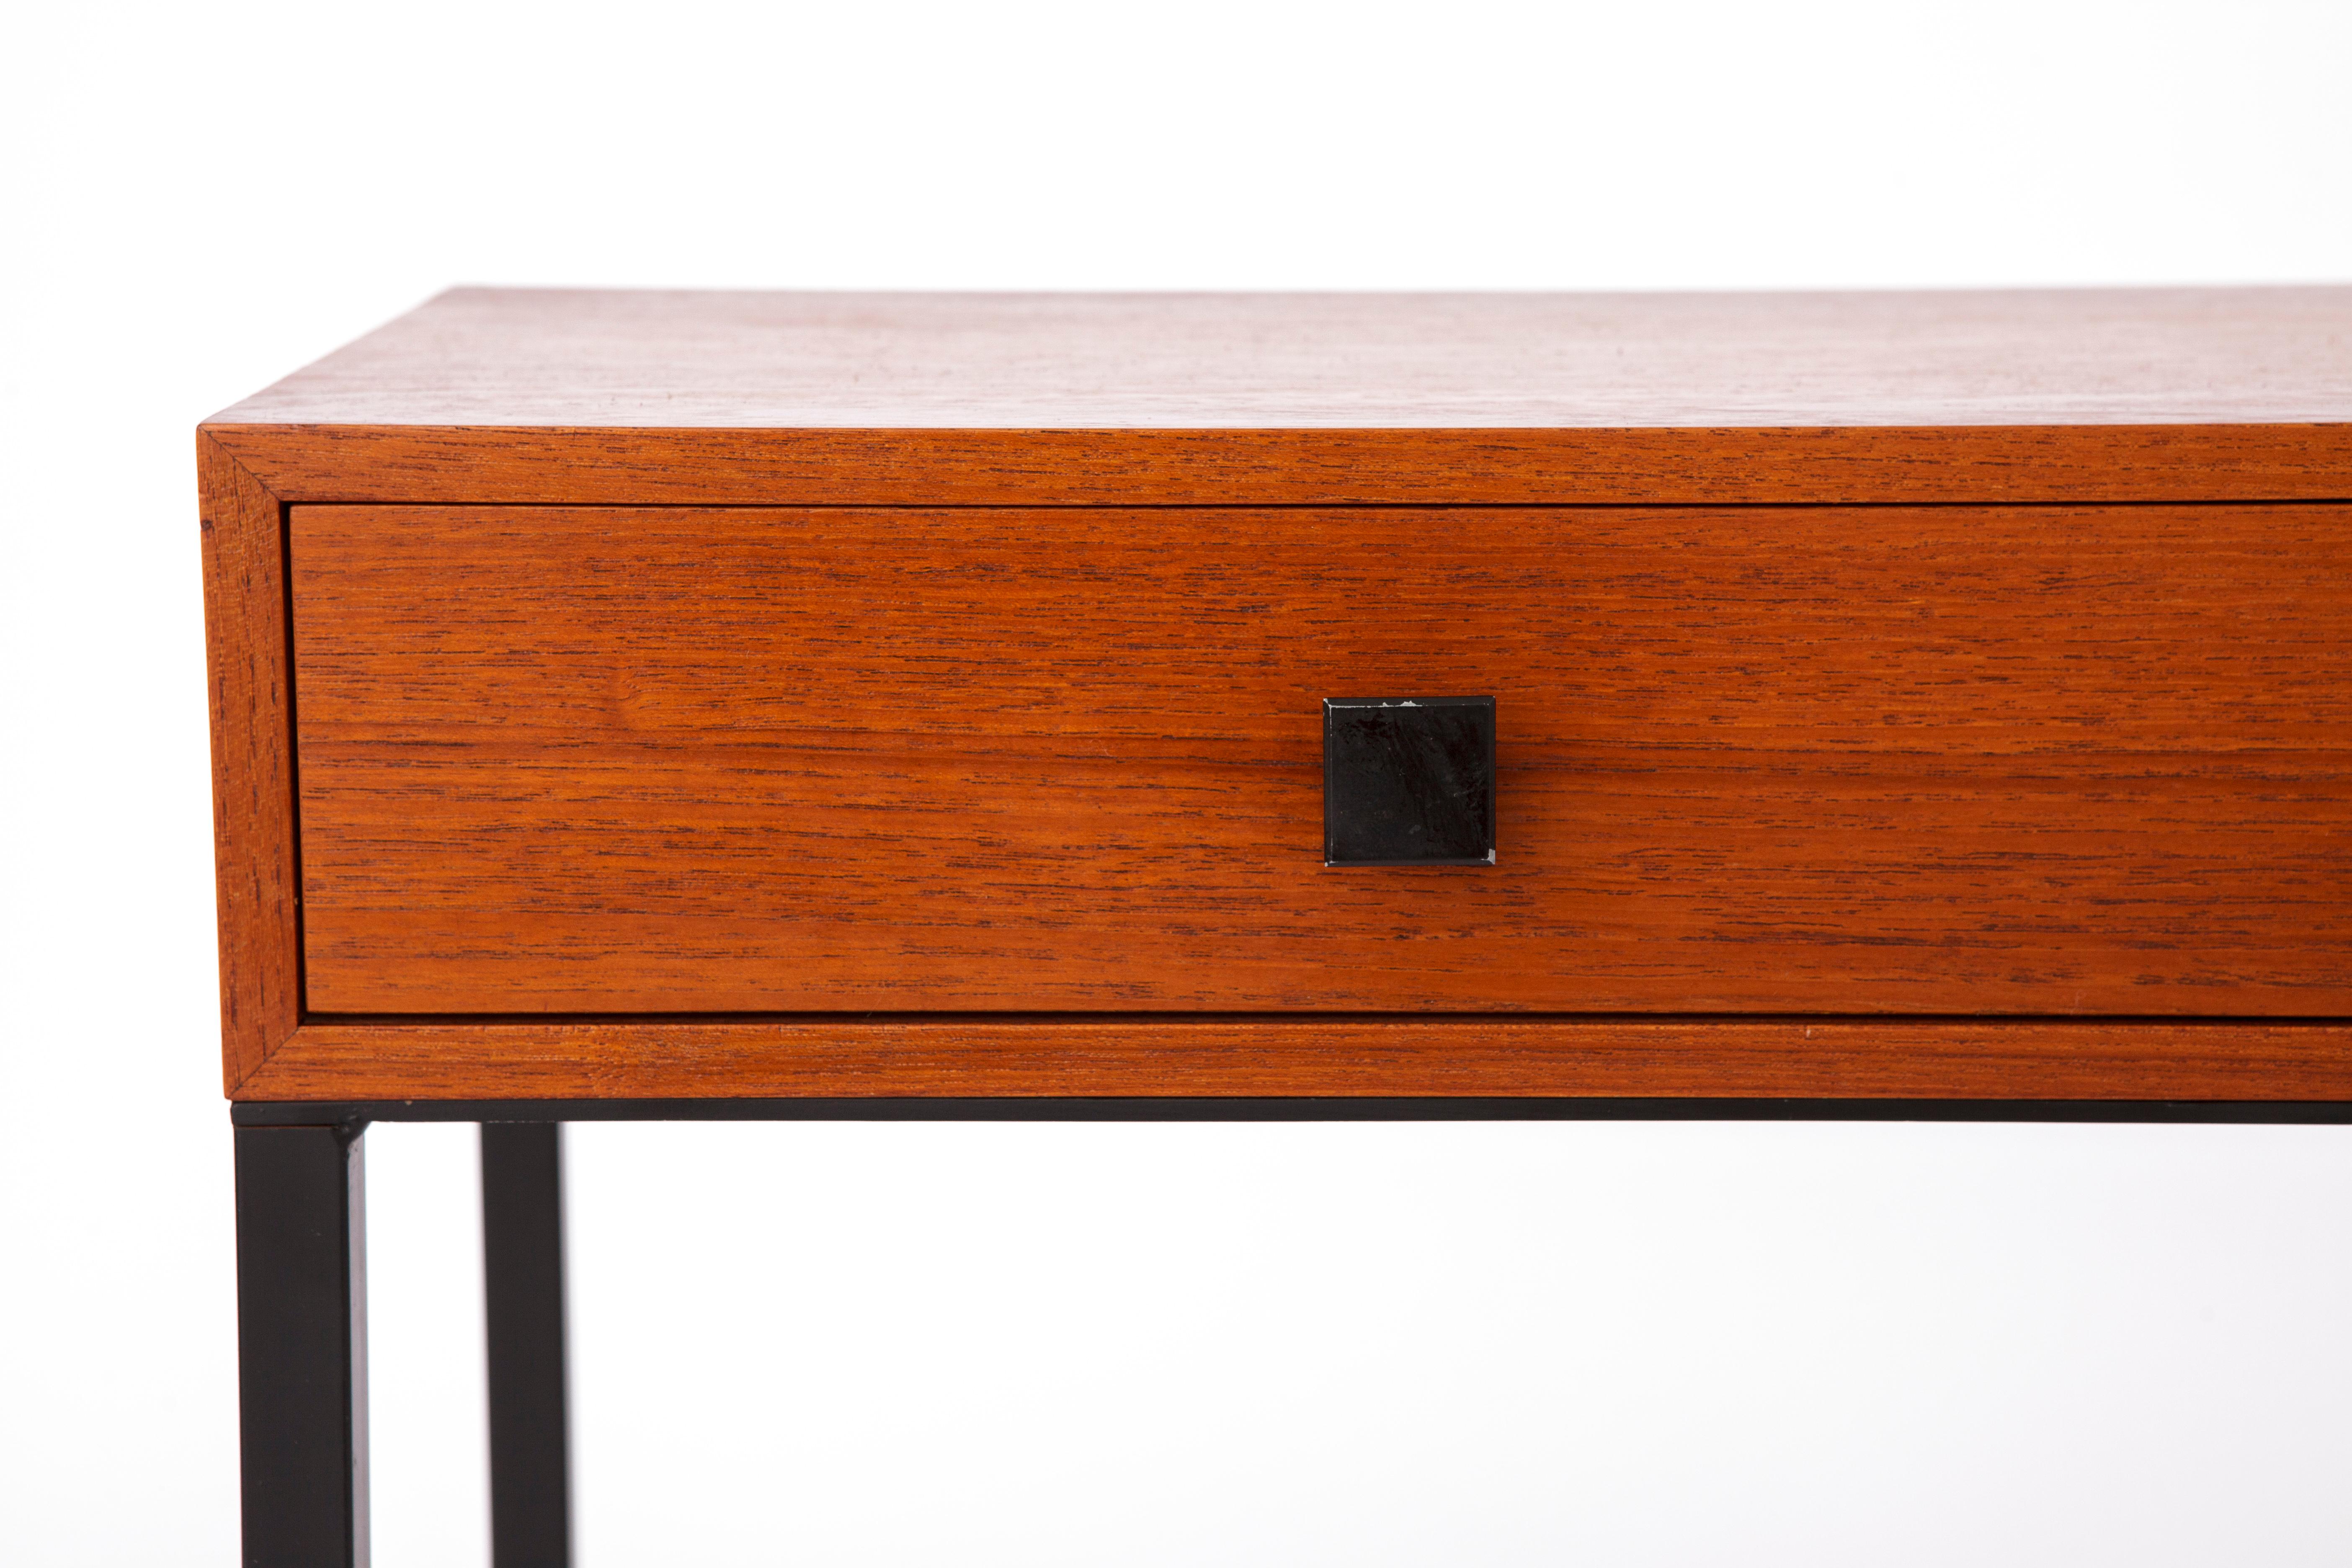 Teak vintage side table with 2 drawers. 
Production period approx. 1960s-1970s. 

Excellent condition. Teak veneer. Metal handles on drawers. 
Surface was polished & oiled. 
No defects. 